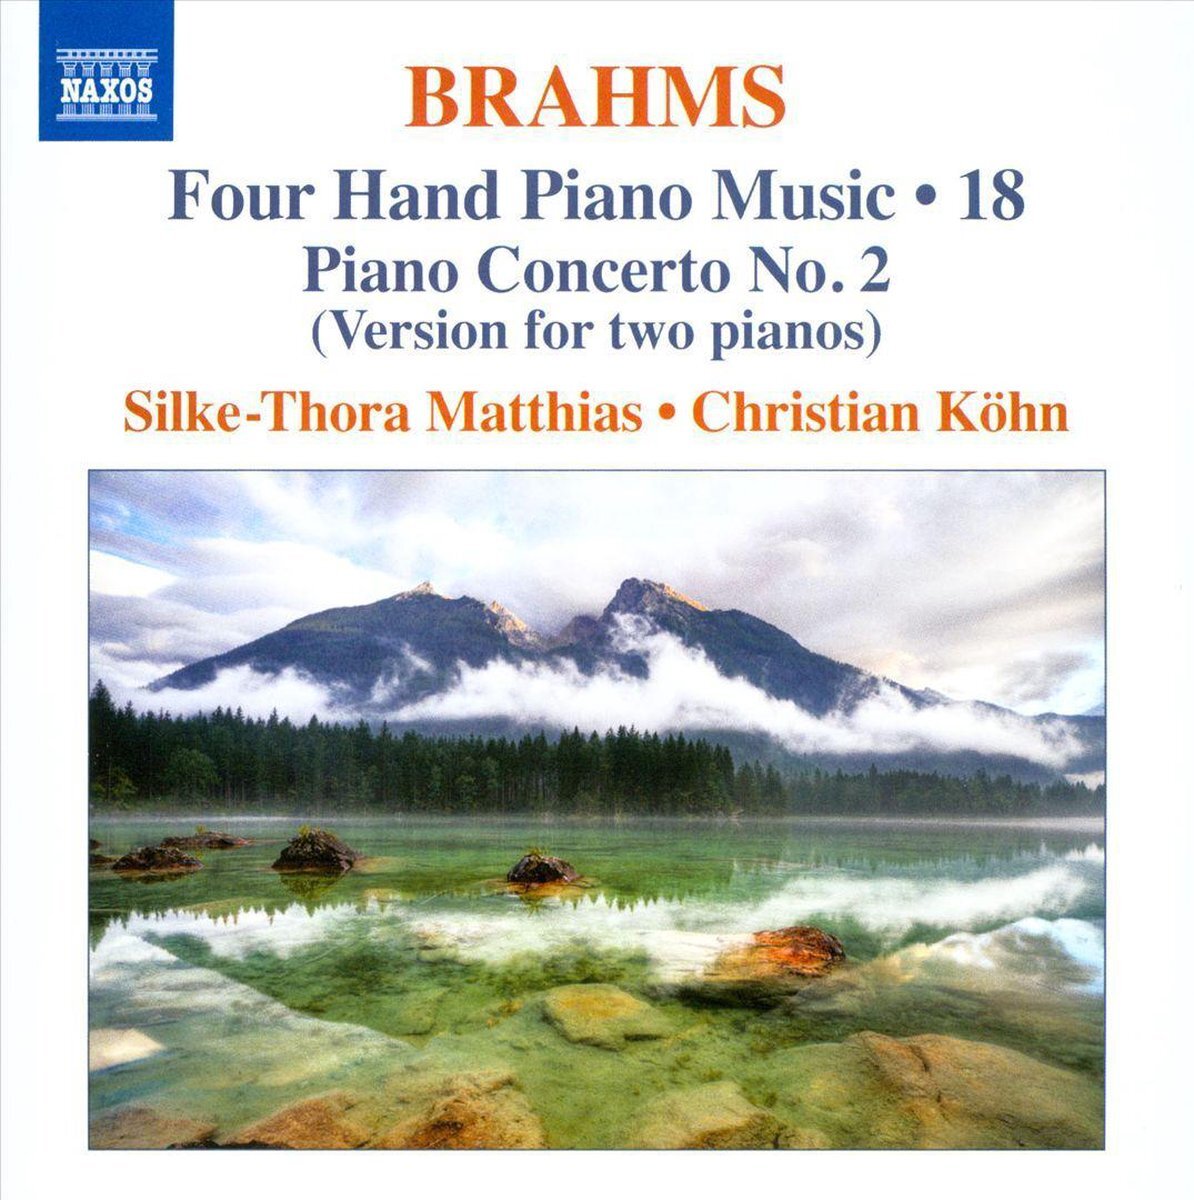 OUTHERE Brahms; Four Hand Piano Music Vol. 18